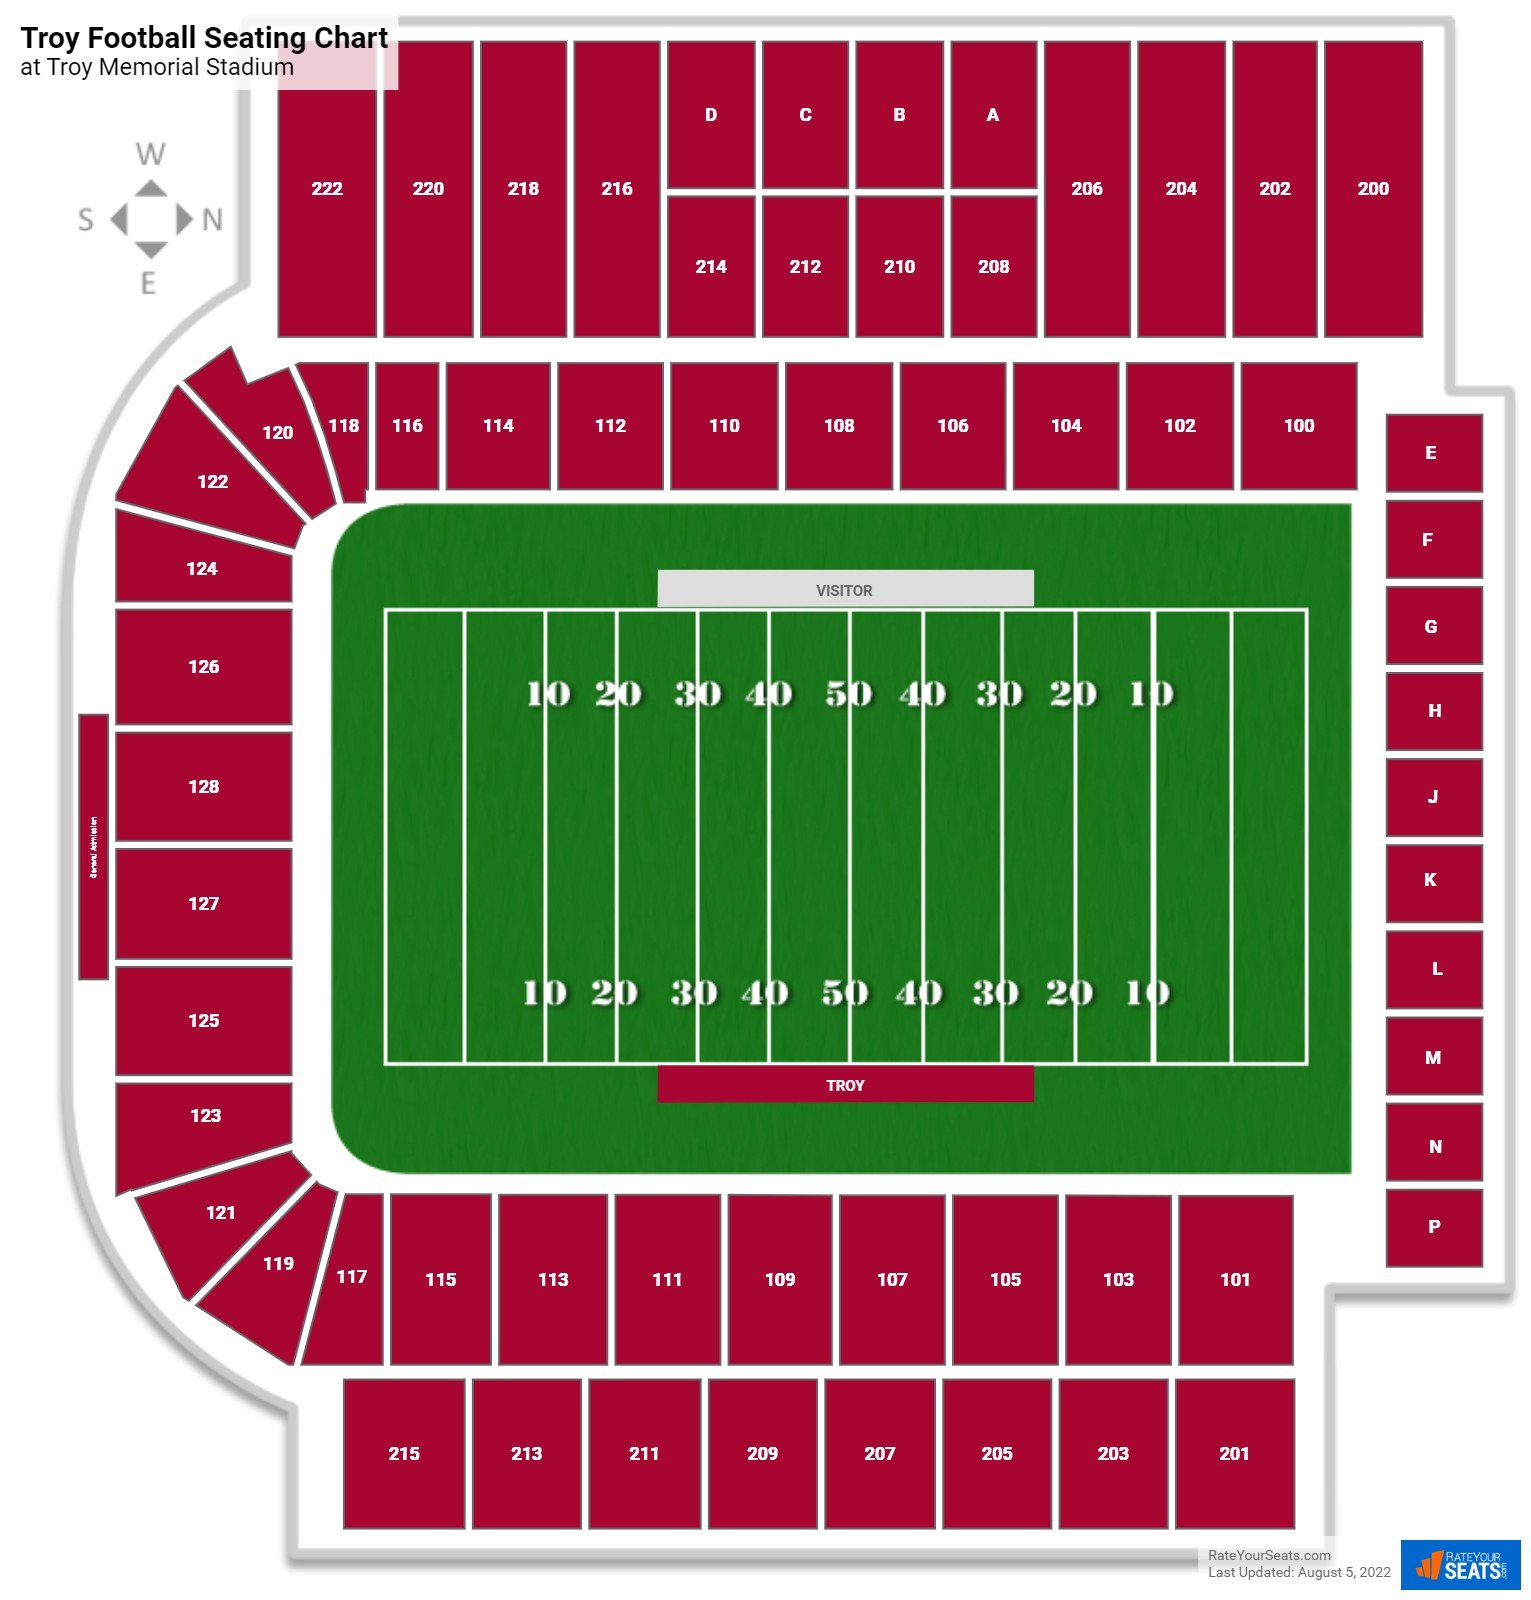 Troy Trojans Seating Chart at Troy Memorial Stadium